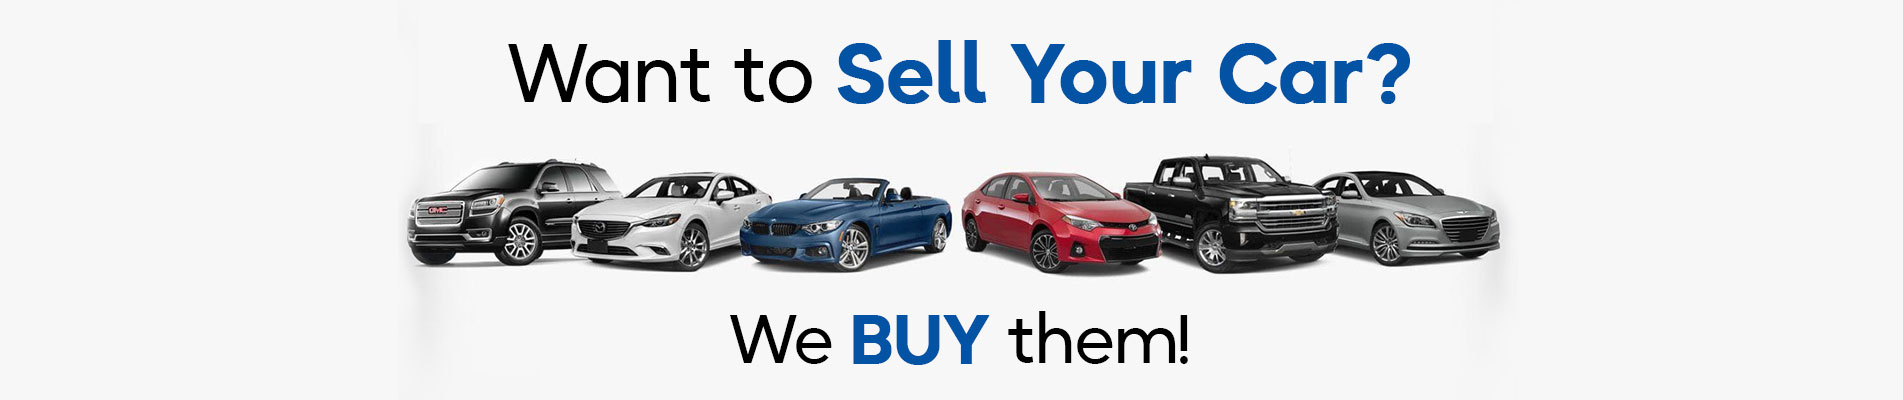 Want to Sell Your Car? We Buy Them